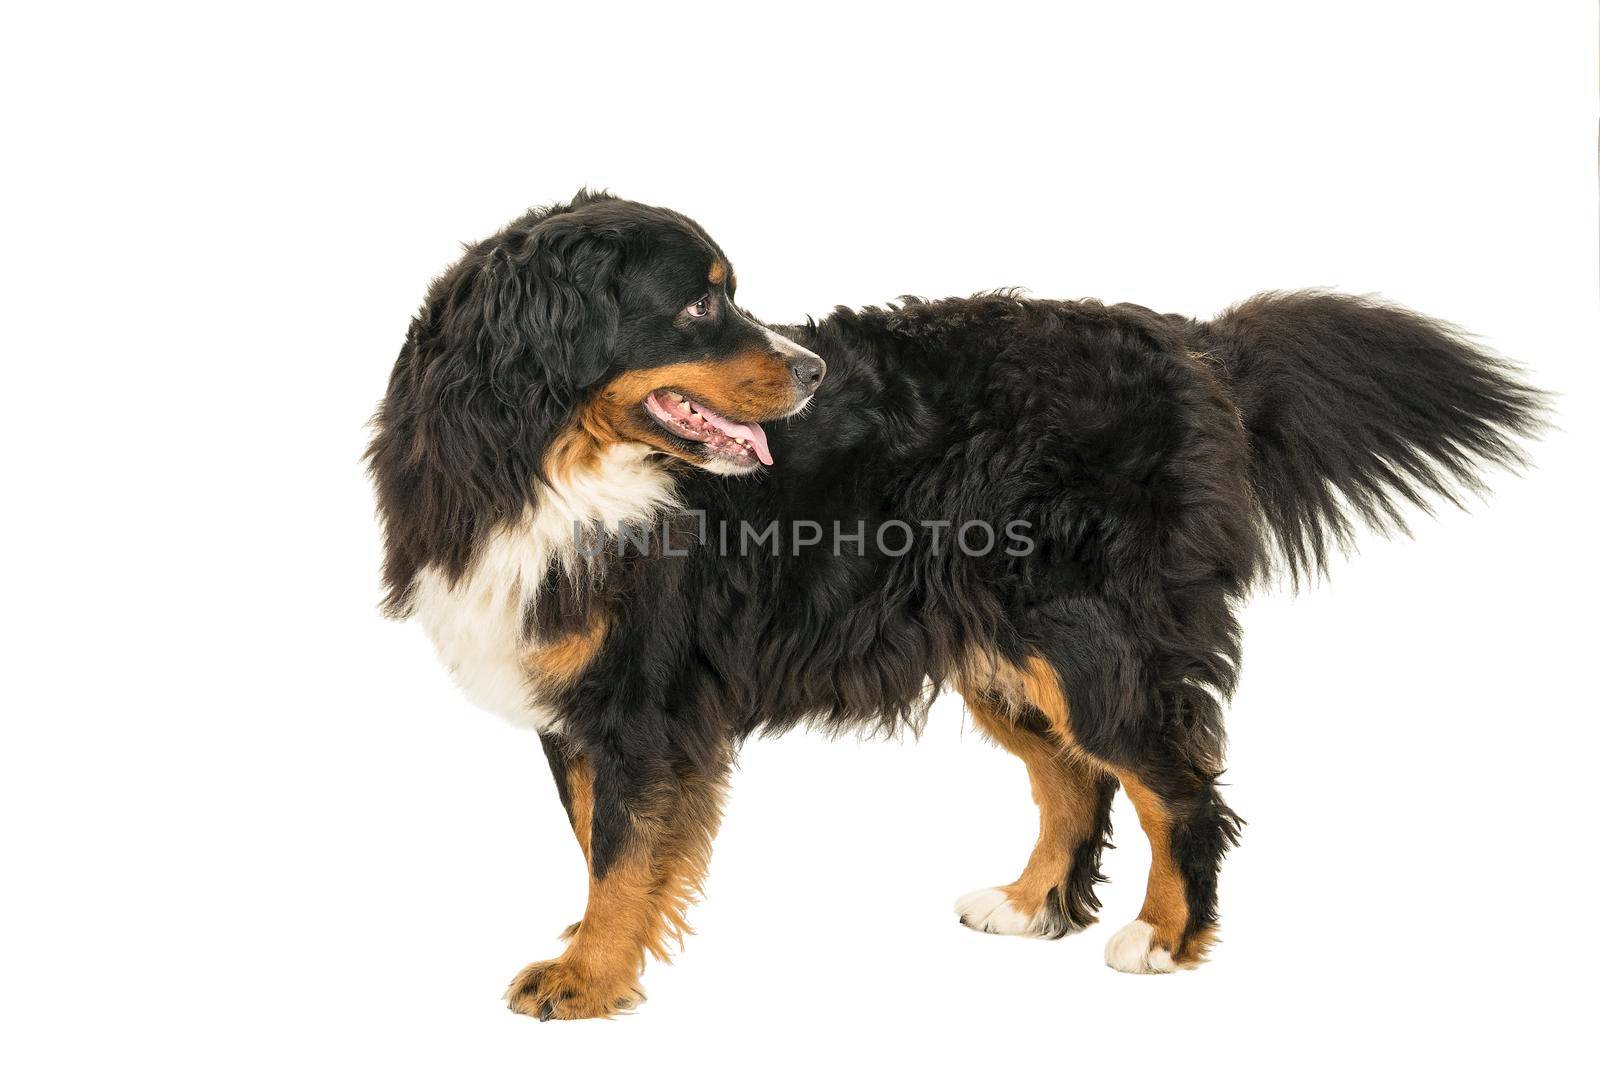 A Berner Sennen Mountain dog standing sideways looking back isolated on a white background